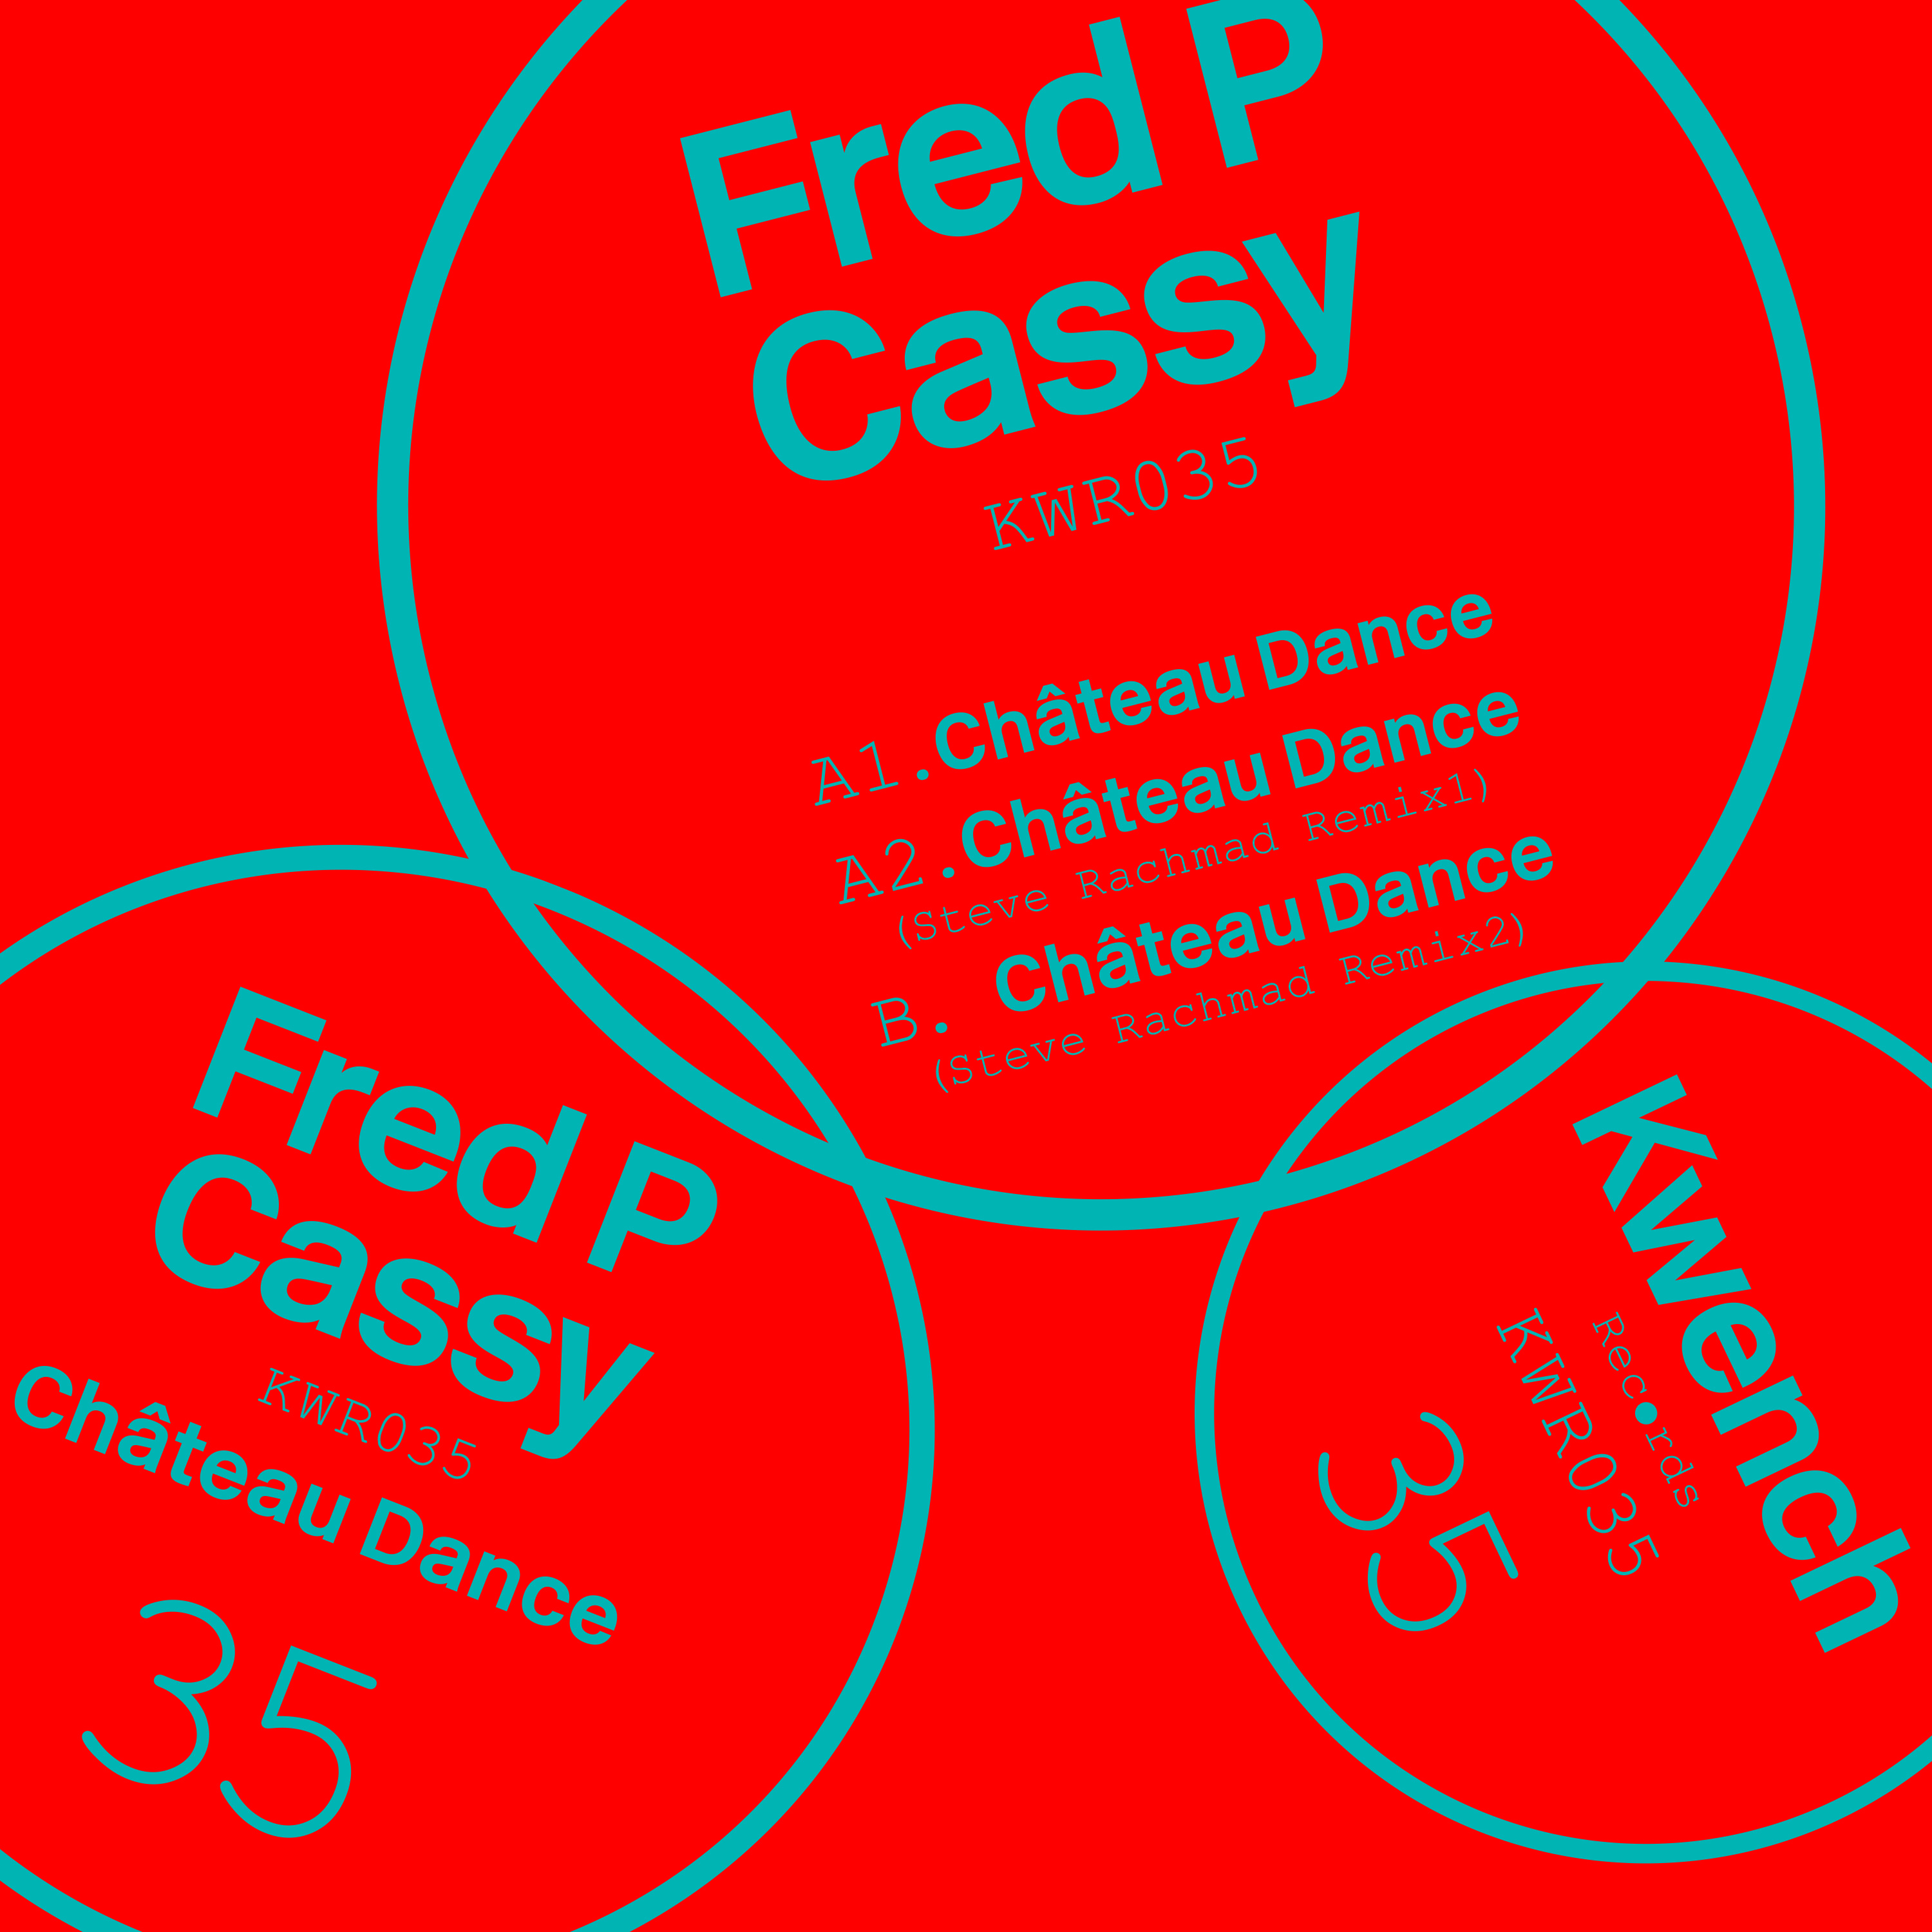 Fred P & Cassy/CHATEAU DANCE 12"